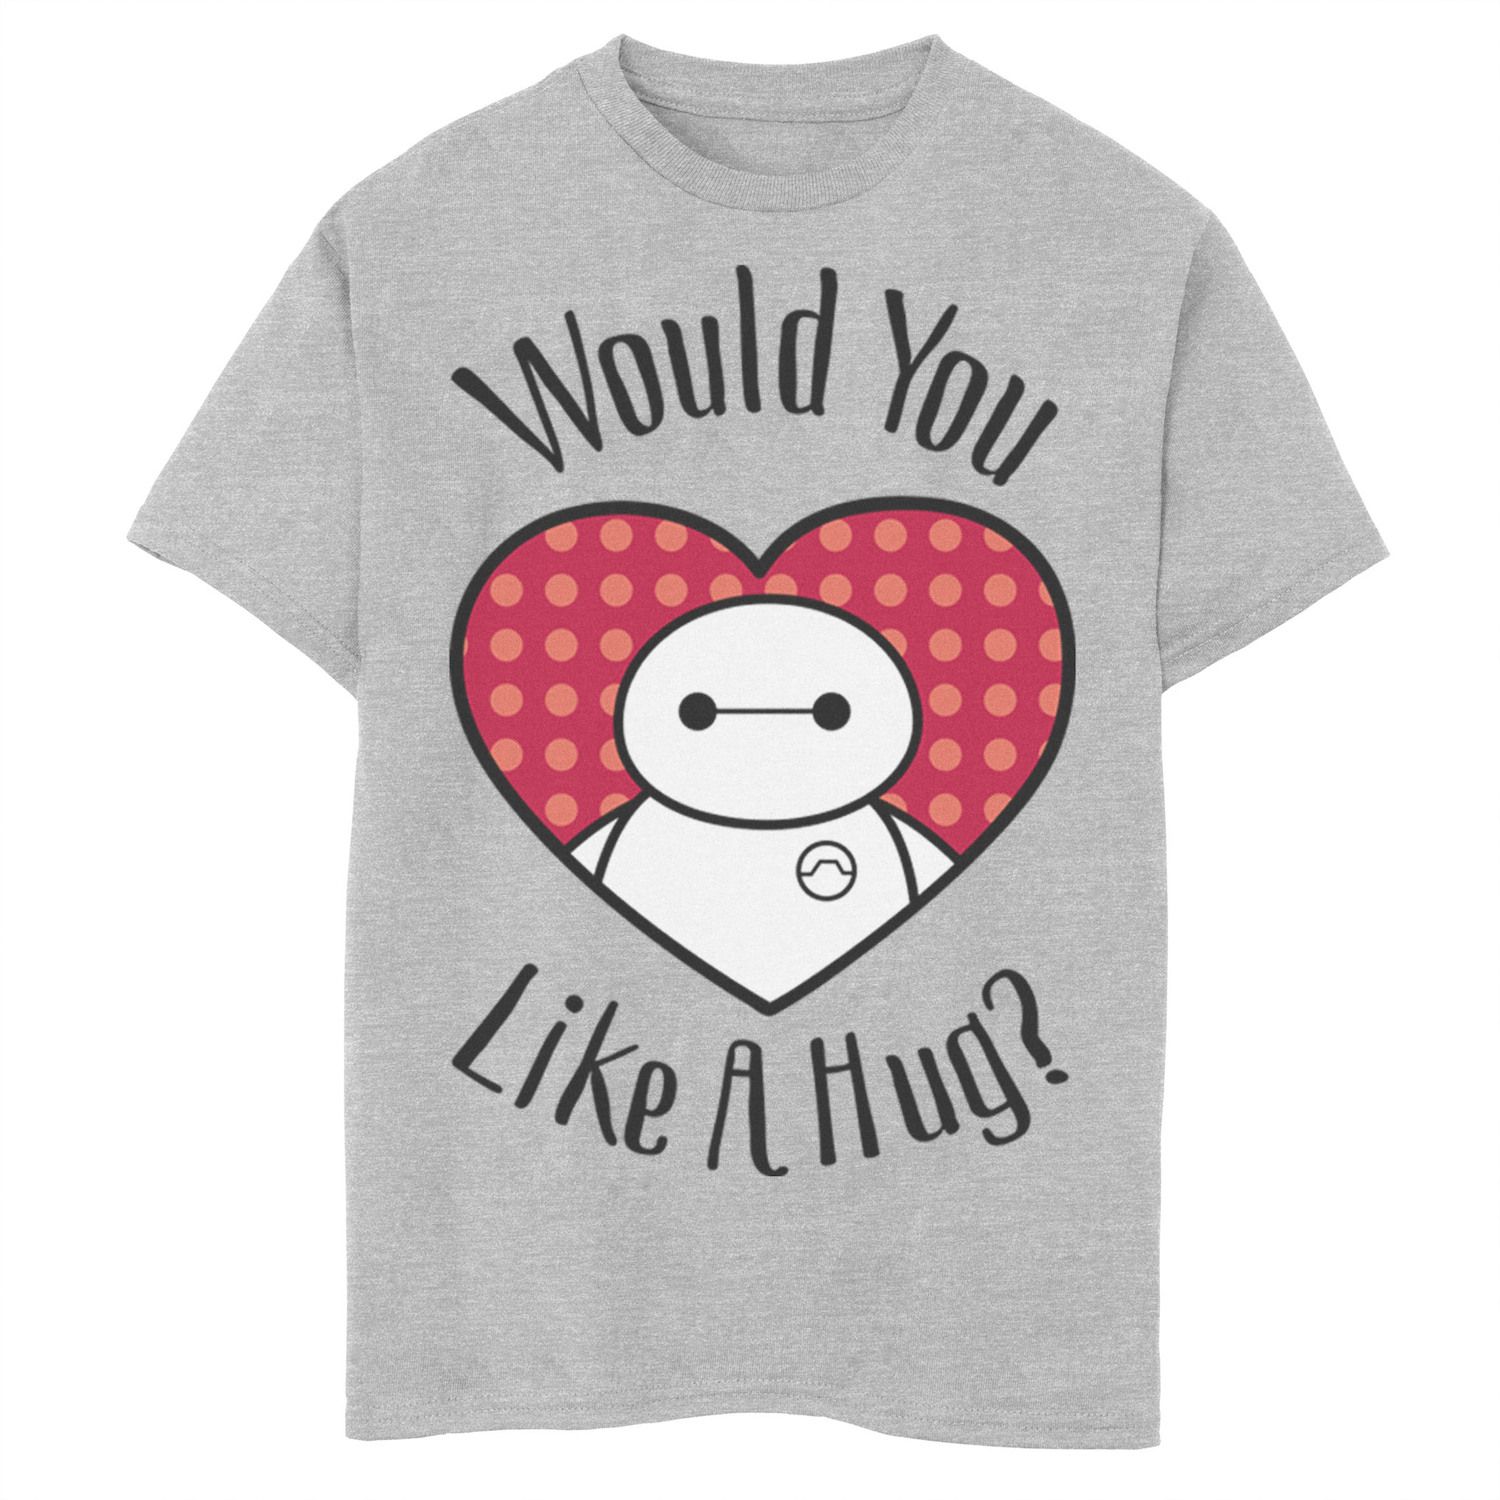 Image for Disney Boys 8-20 Big Hero 6 Baymax In A Heart Would You Like A Hug Tee at Kohl's.